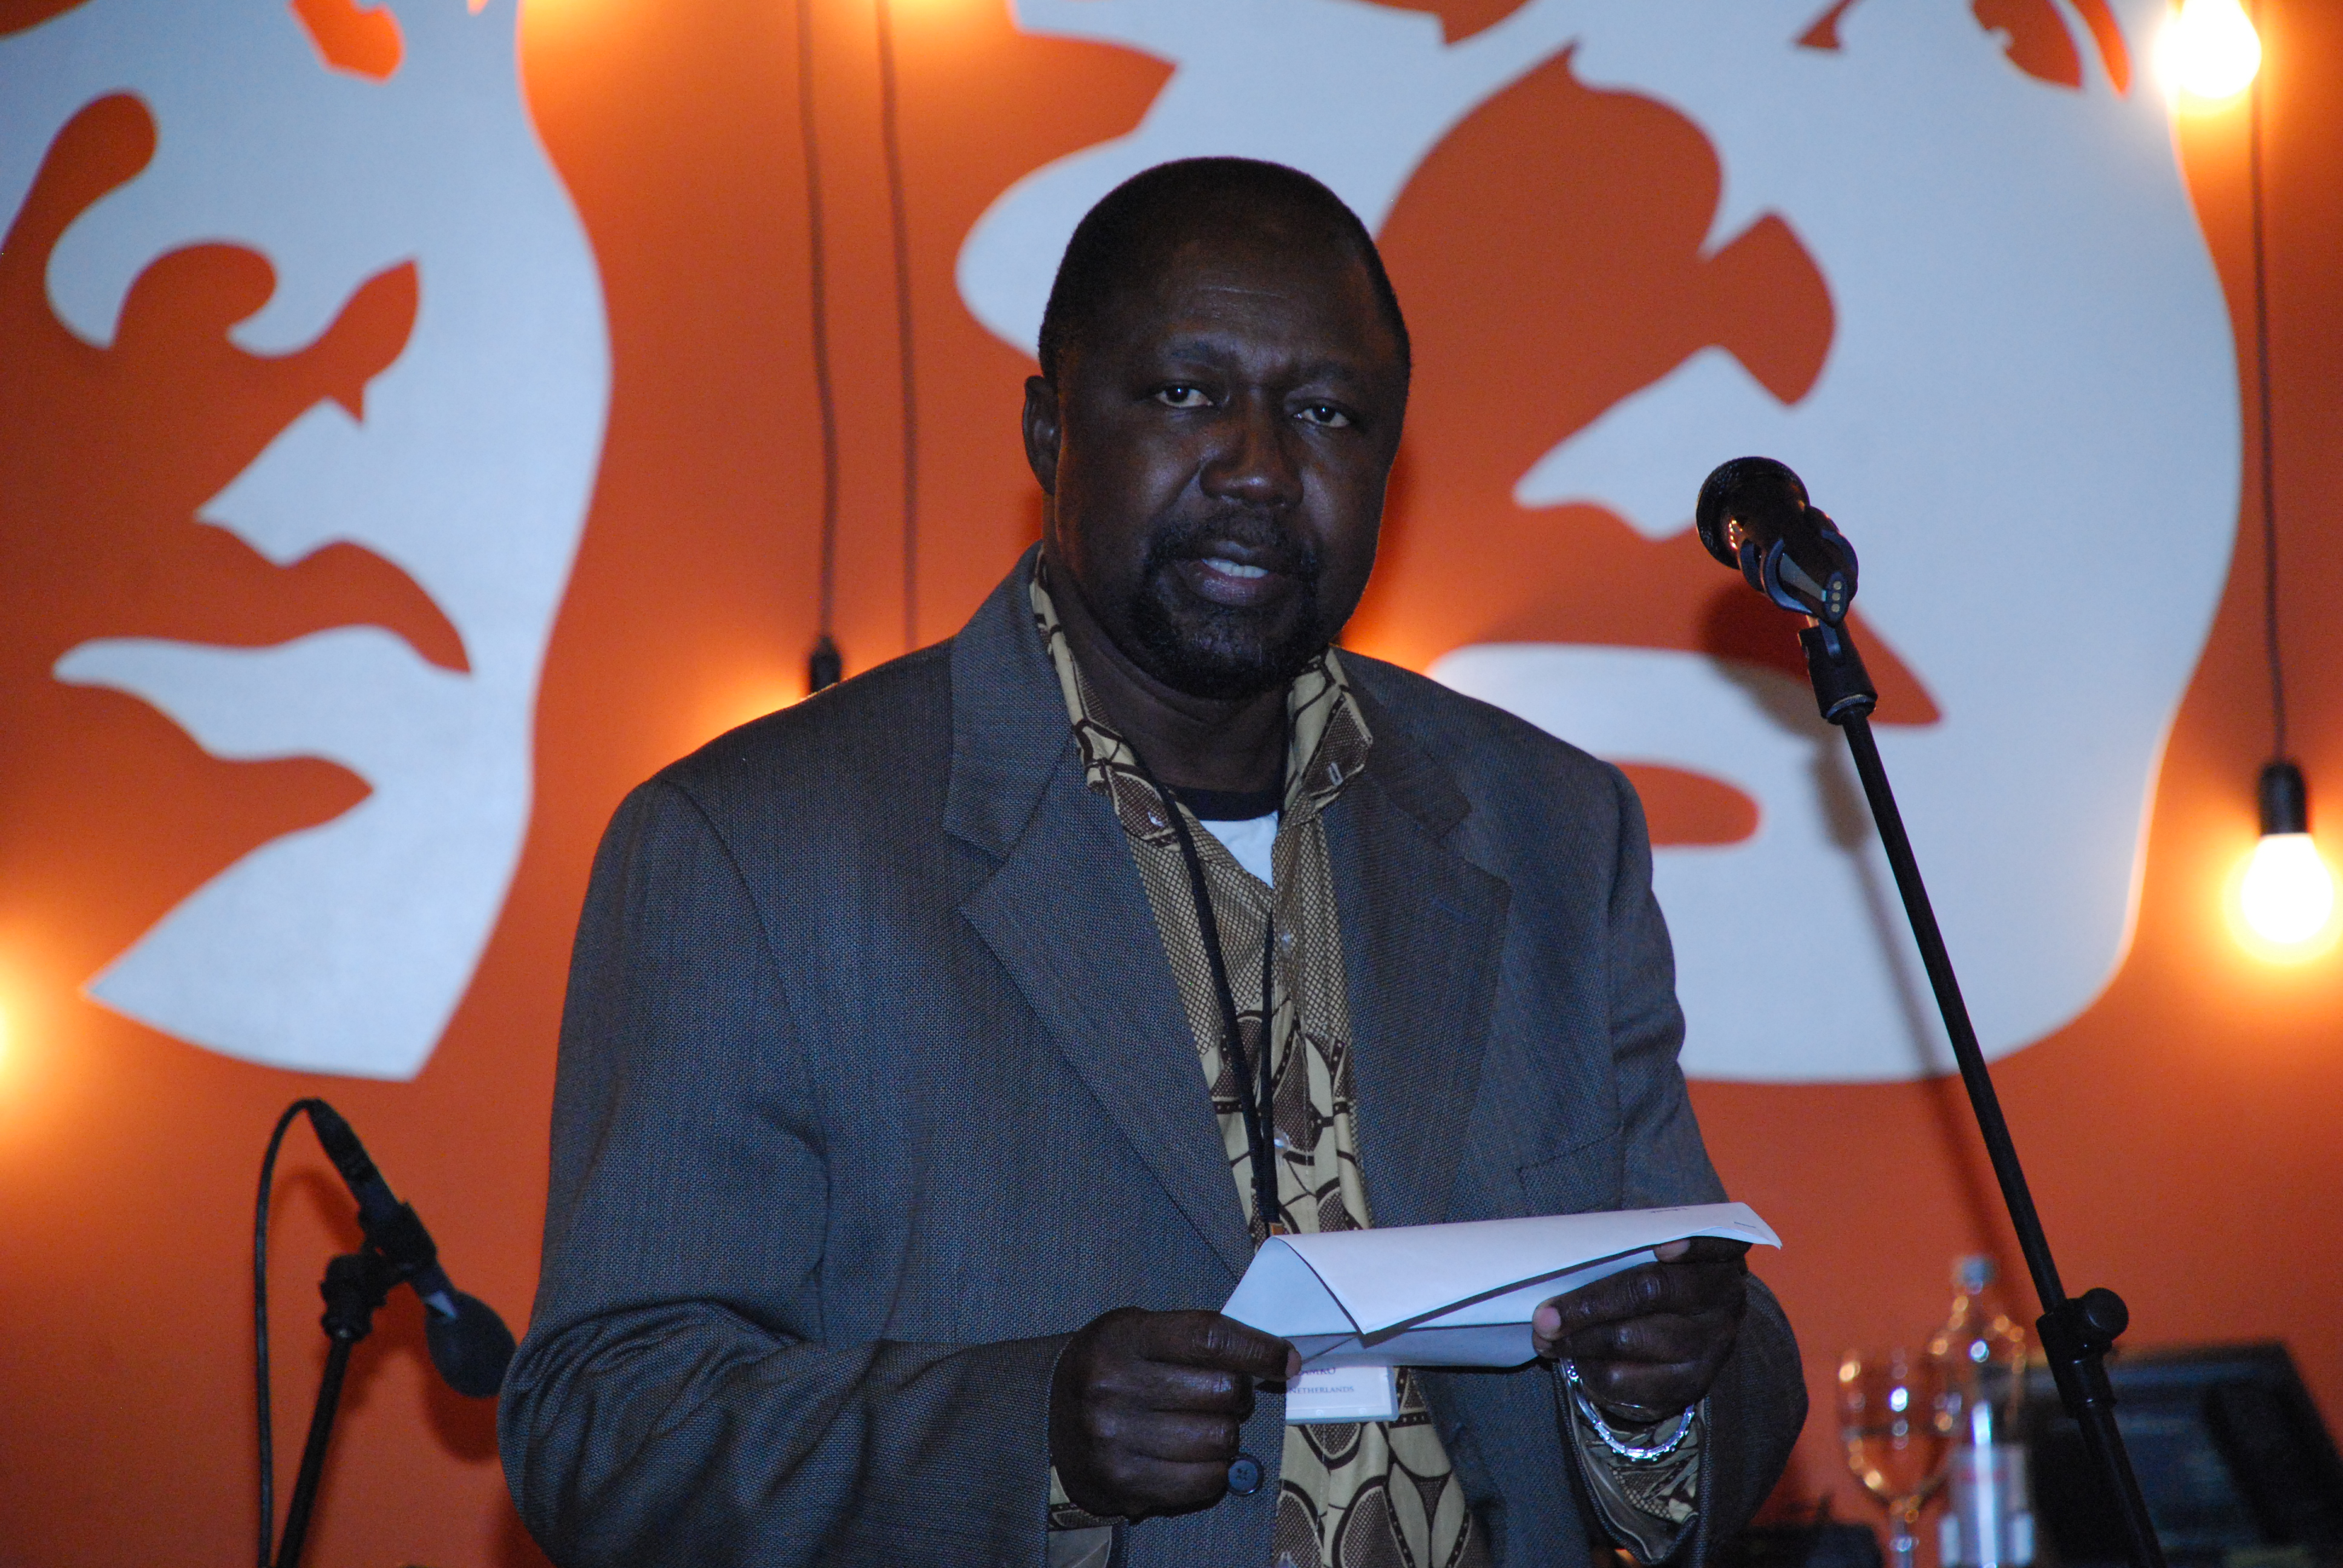 Koulsy Lamko from Chad, Guest Writer in Amsterdam, reading at an event during the General Assembly.